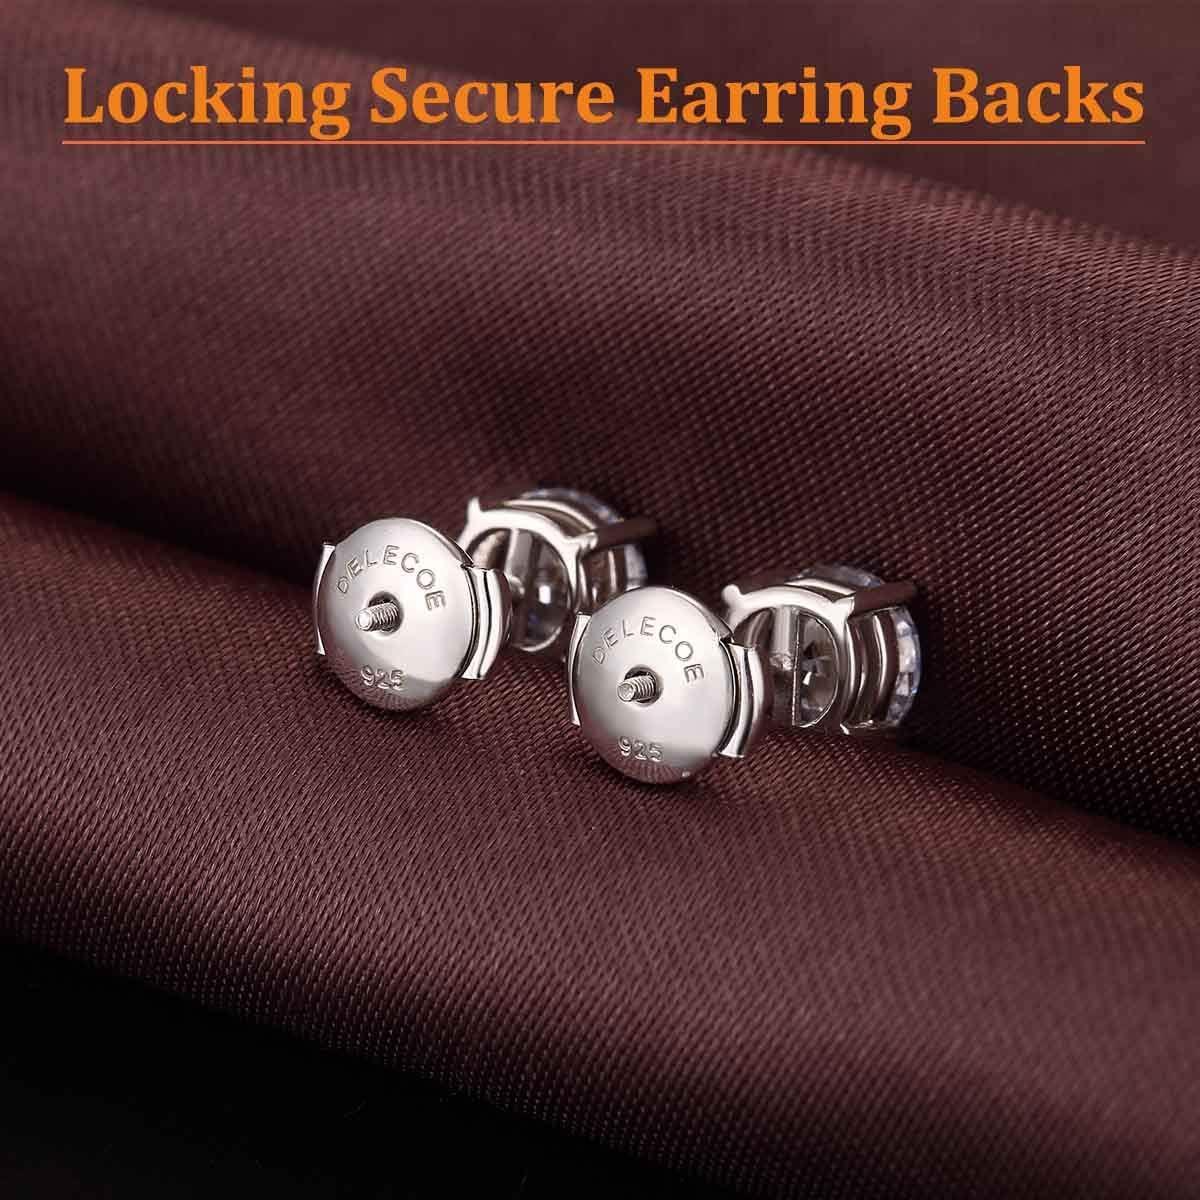 DELECOE 14K Gold Plated Earring Backs Replacements, 925 Sterling Silver Hypoallergenic Secure Gold Earring Backs Locking for Studs Earrings